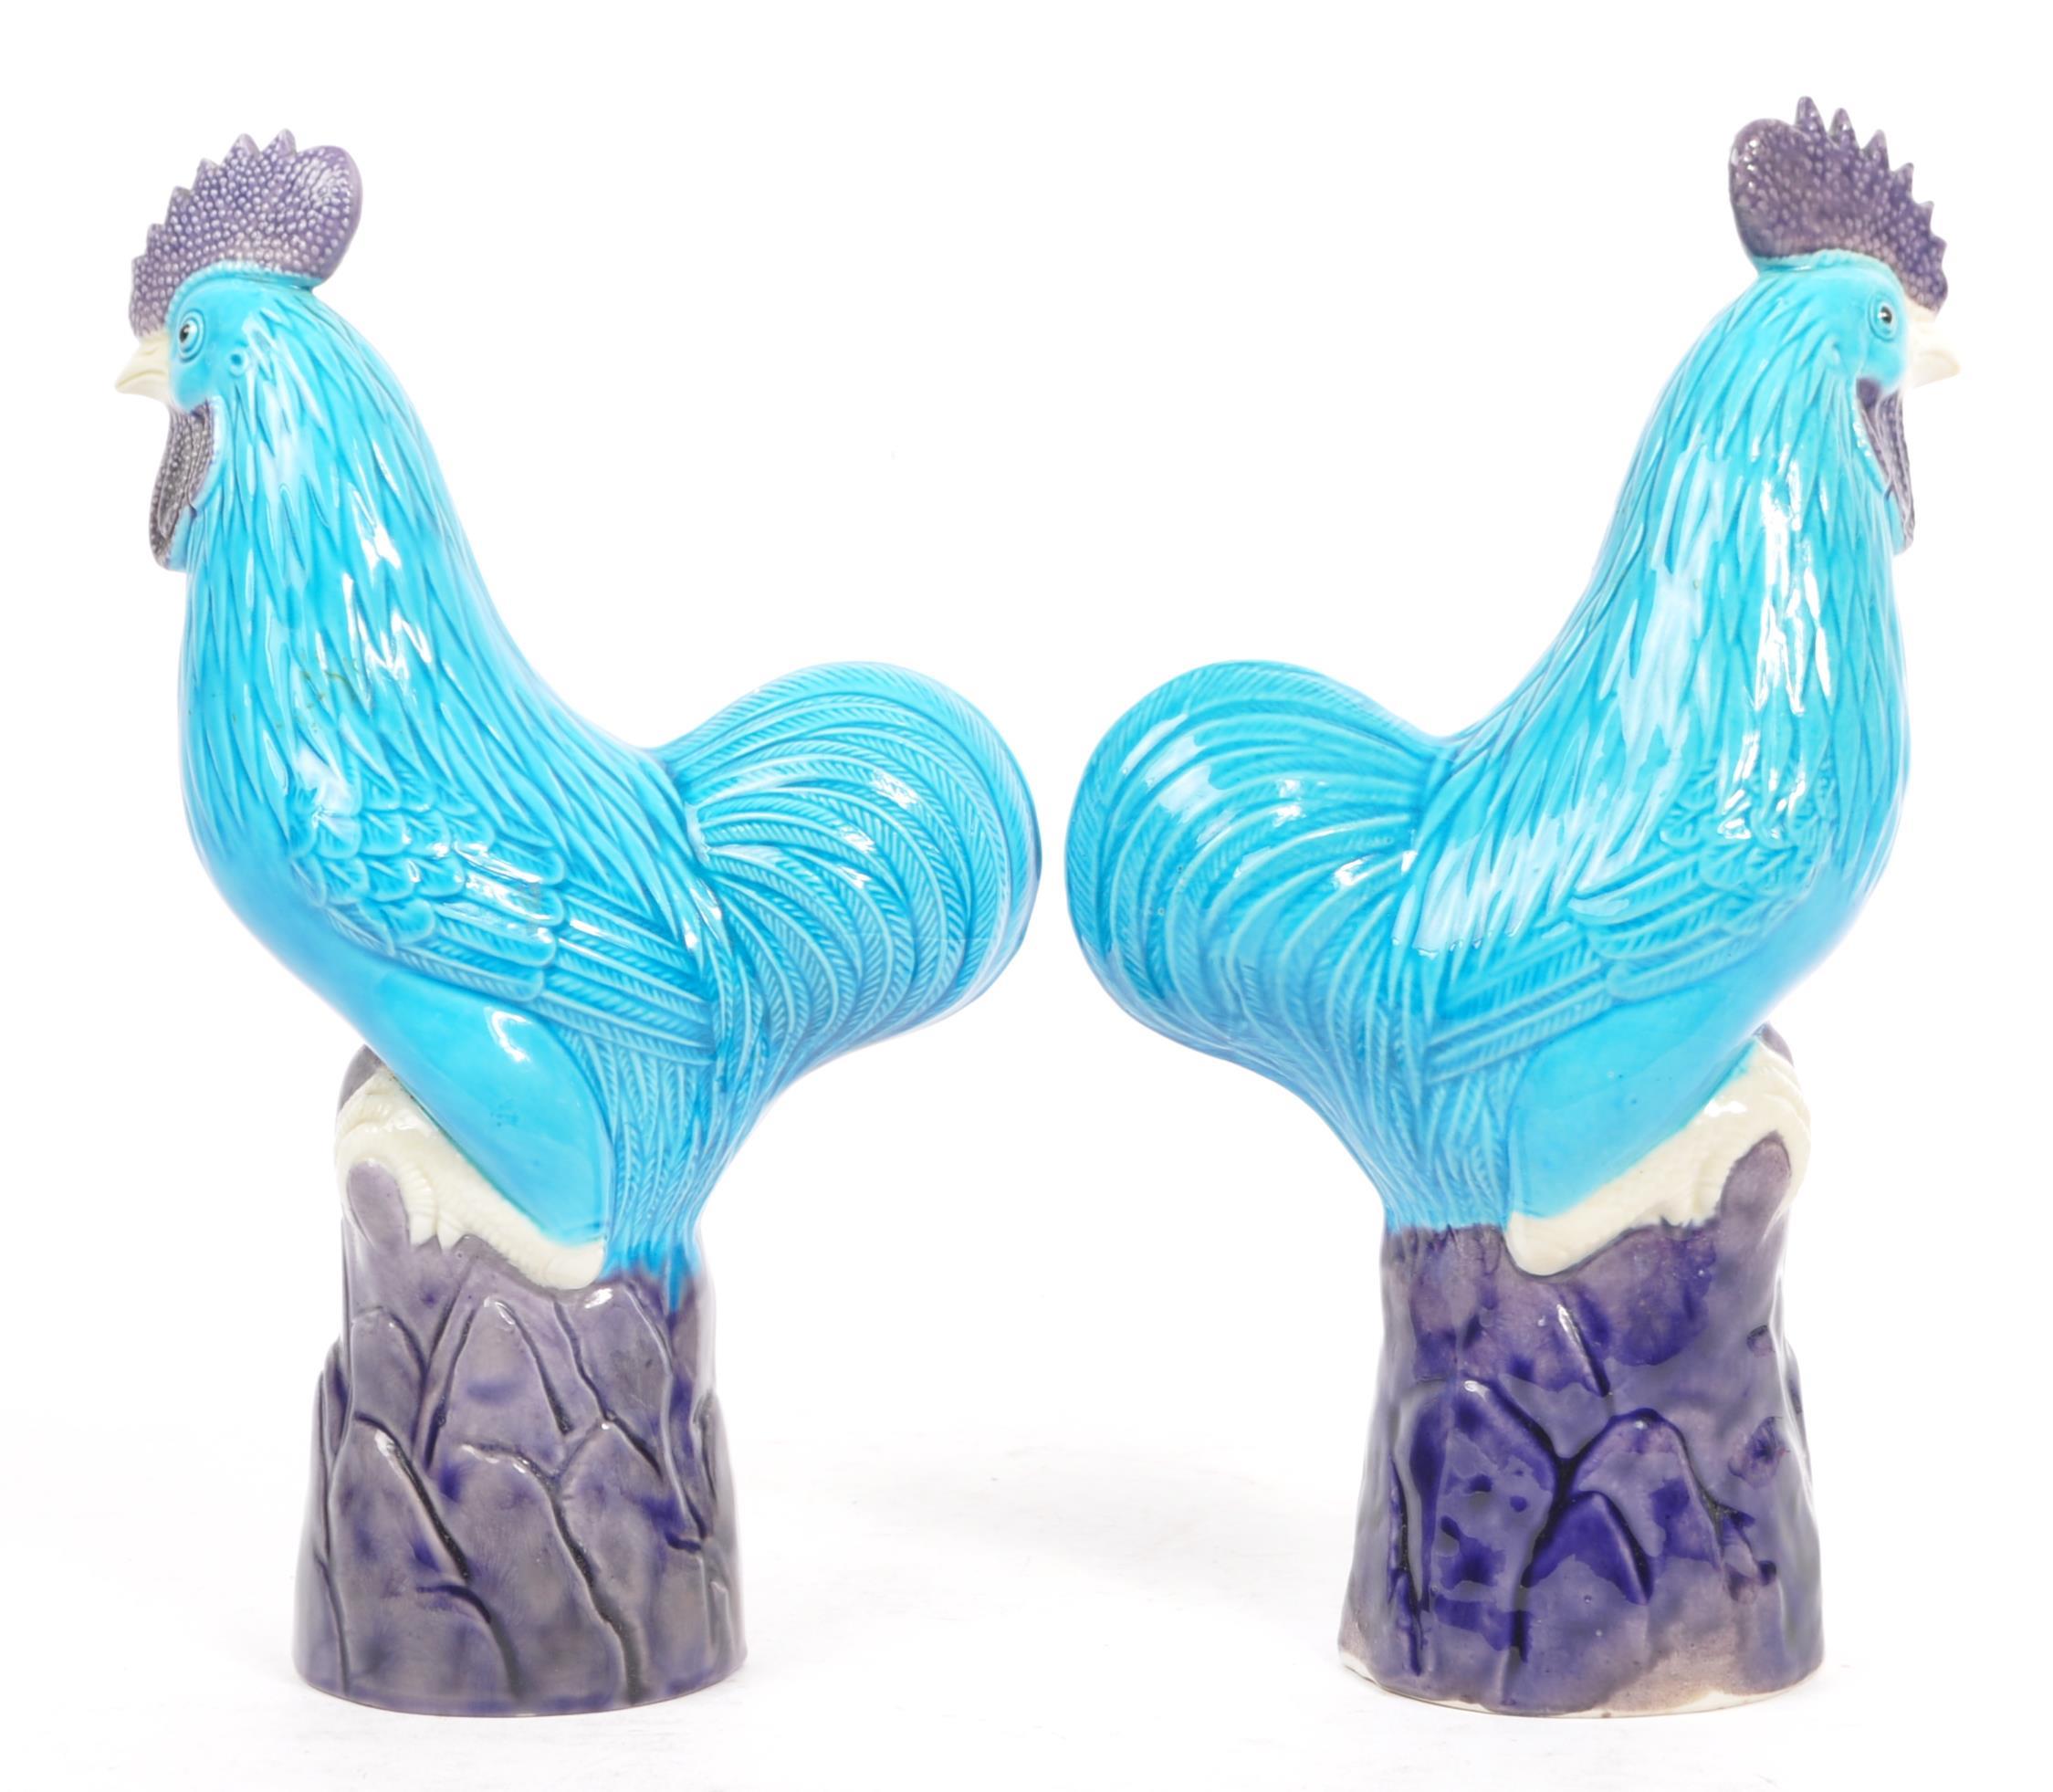 TWO MID 20TH CENTURY PORCELAIN COCKEREL ROOSTER FIGURINES - Image 3 of 6